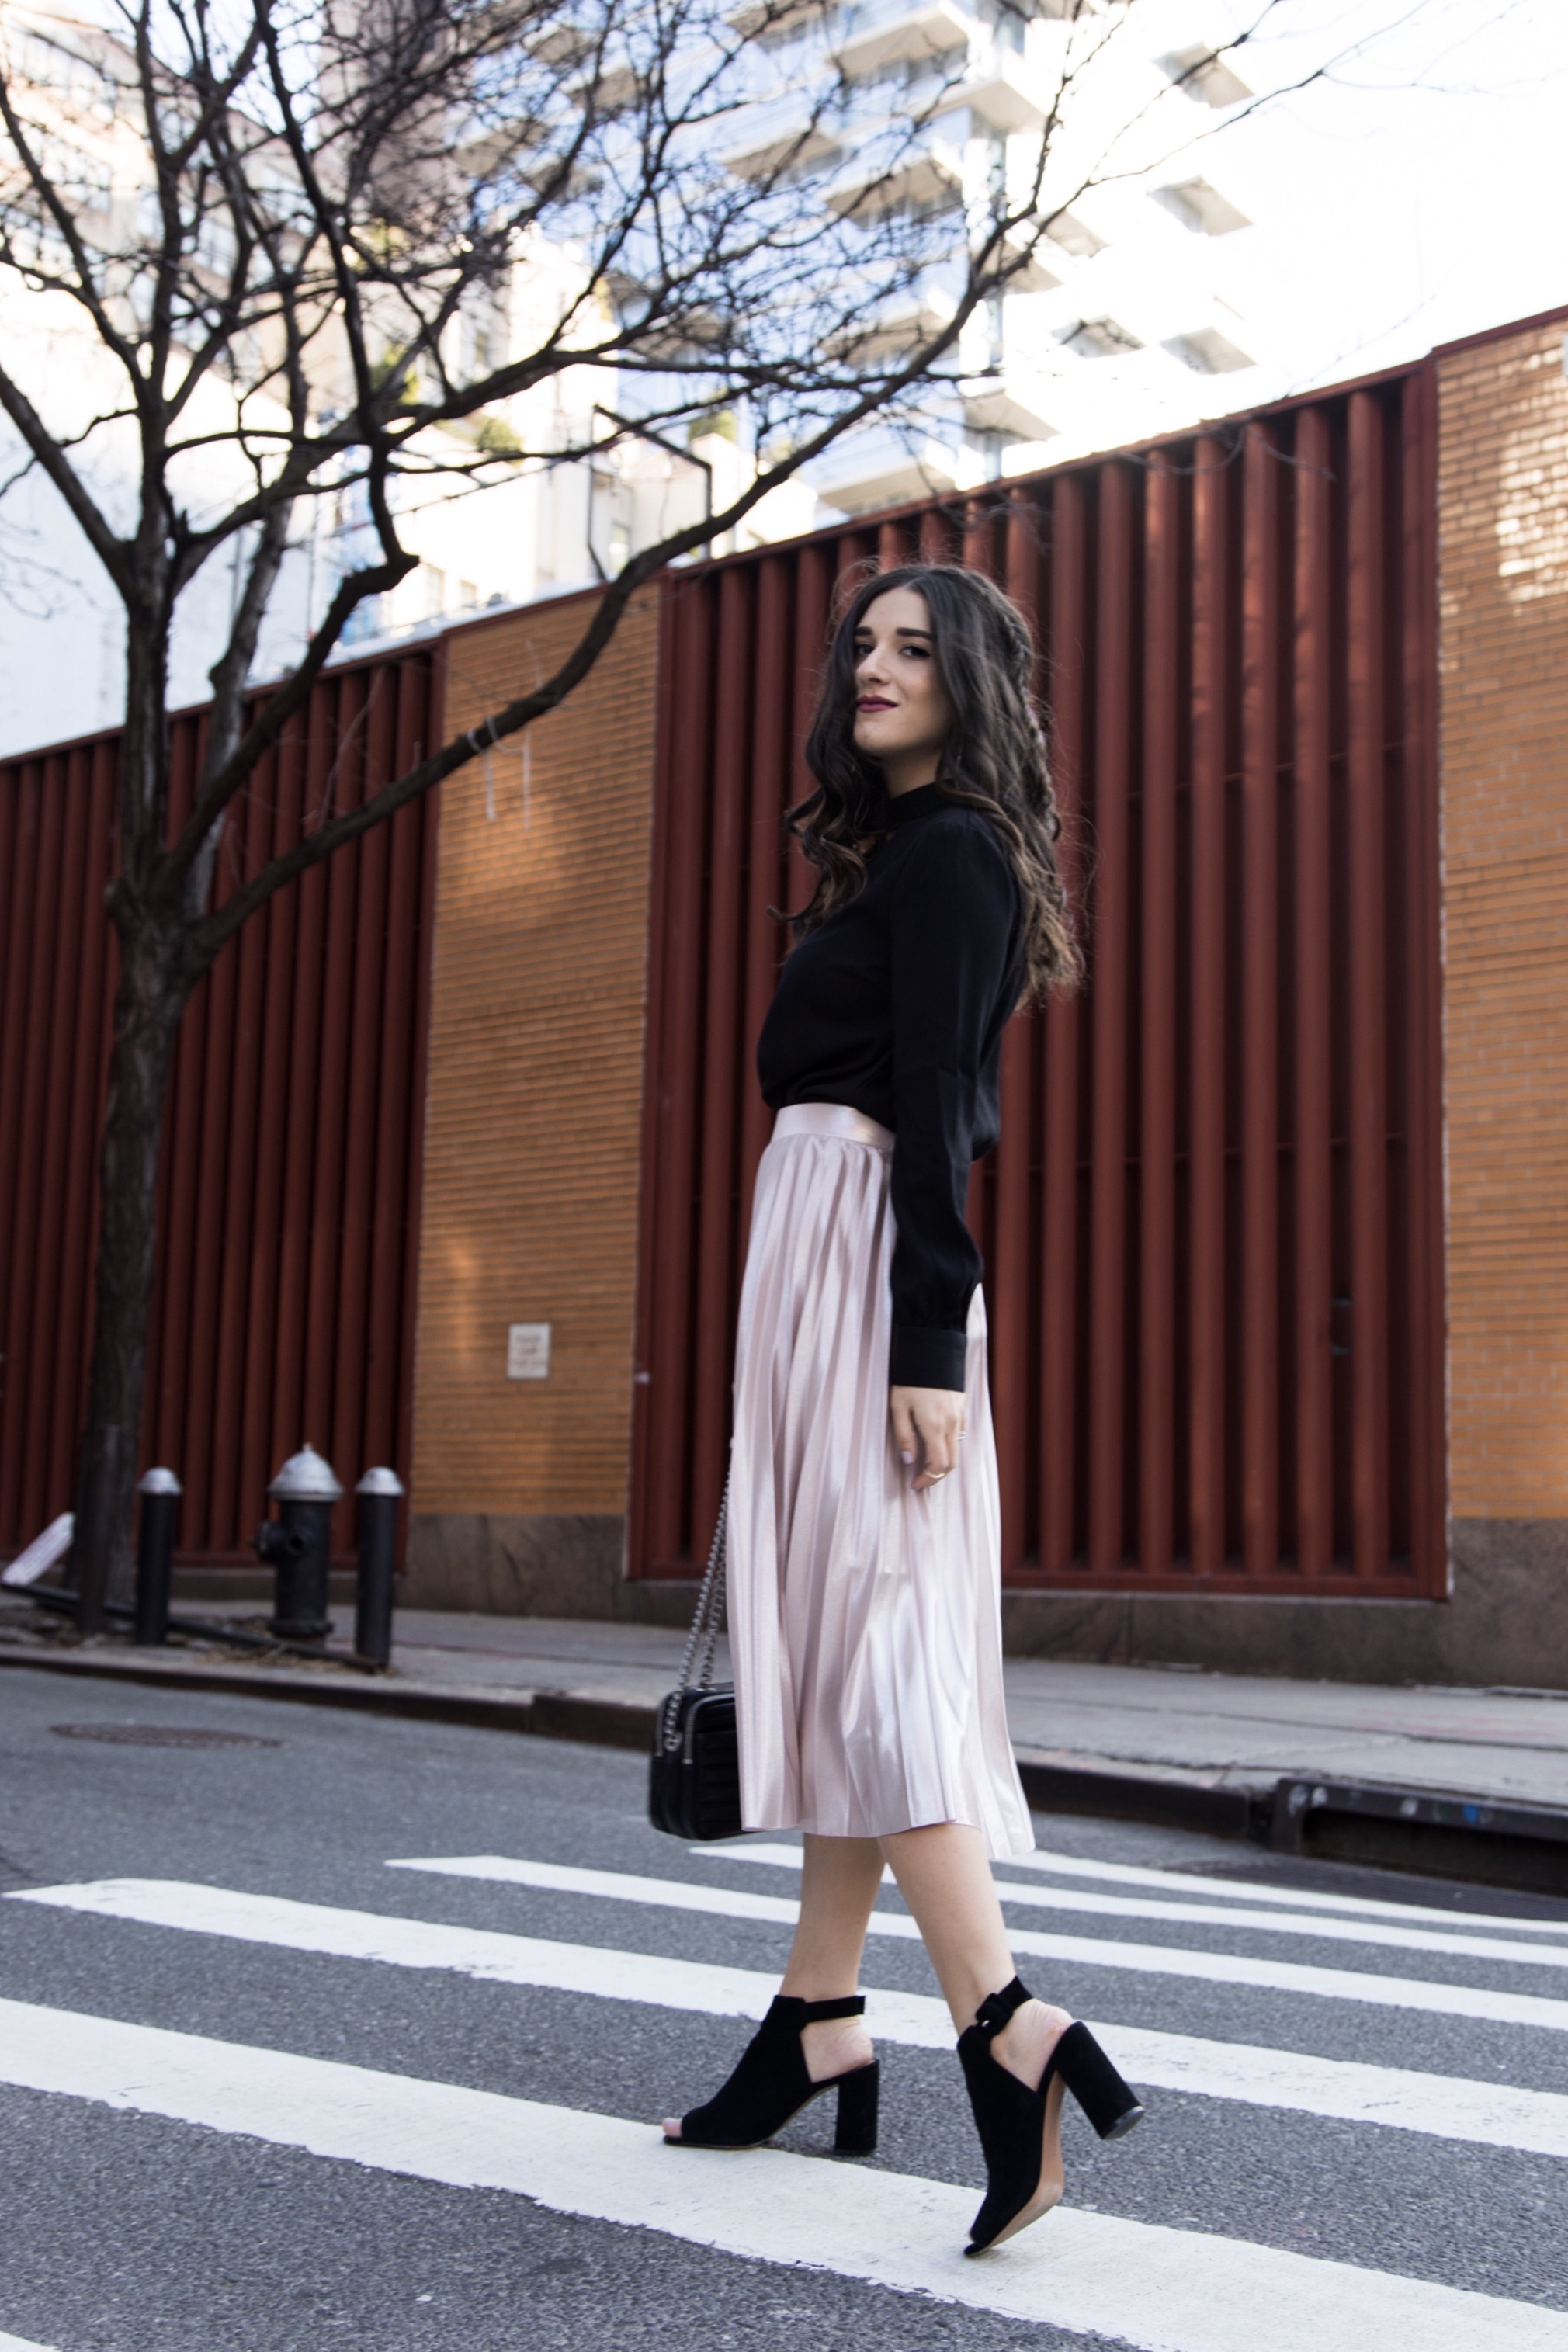 Metallic Midi Skirt Black Cutout Top How I Pack In A Carry On Esther Santer Fashion Blog NYC Street Style Blogger Outfit OOTD Trendy Feminine Girly Spring Hairstyle Waves Travel  Tips Honeymoon Photshoot Pose Wearing Shop Peep Toe Booties Henri Bendel.jpg